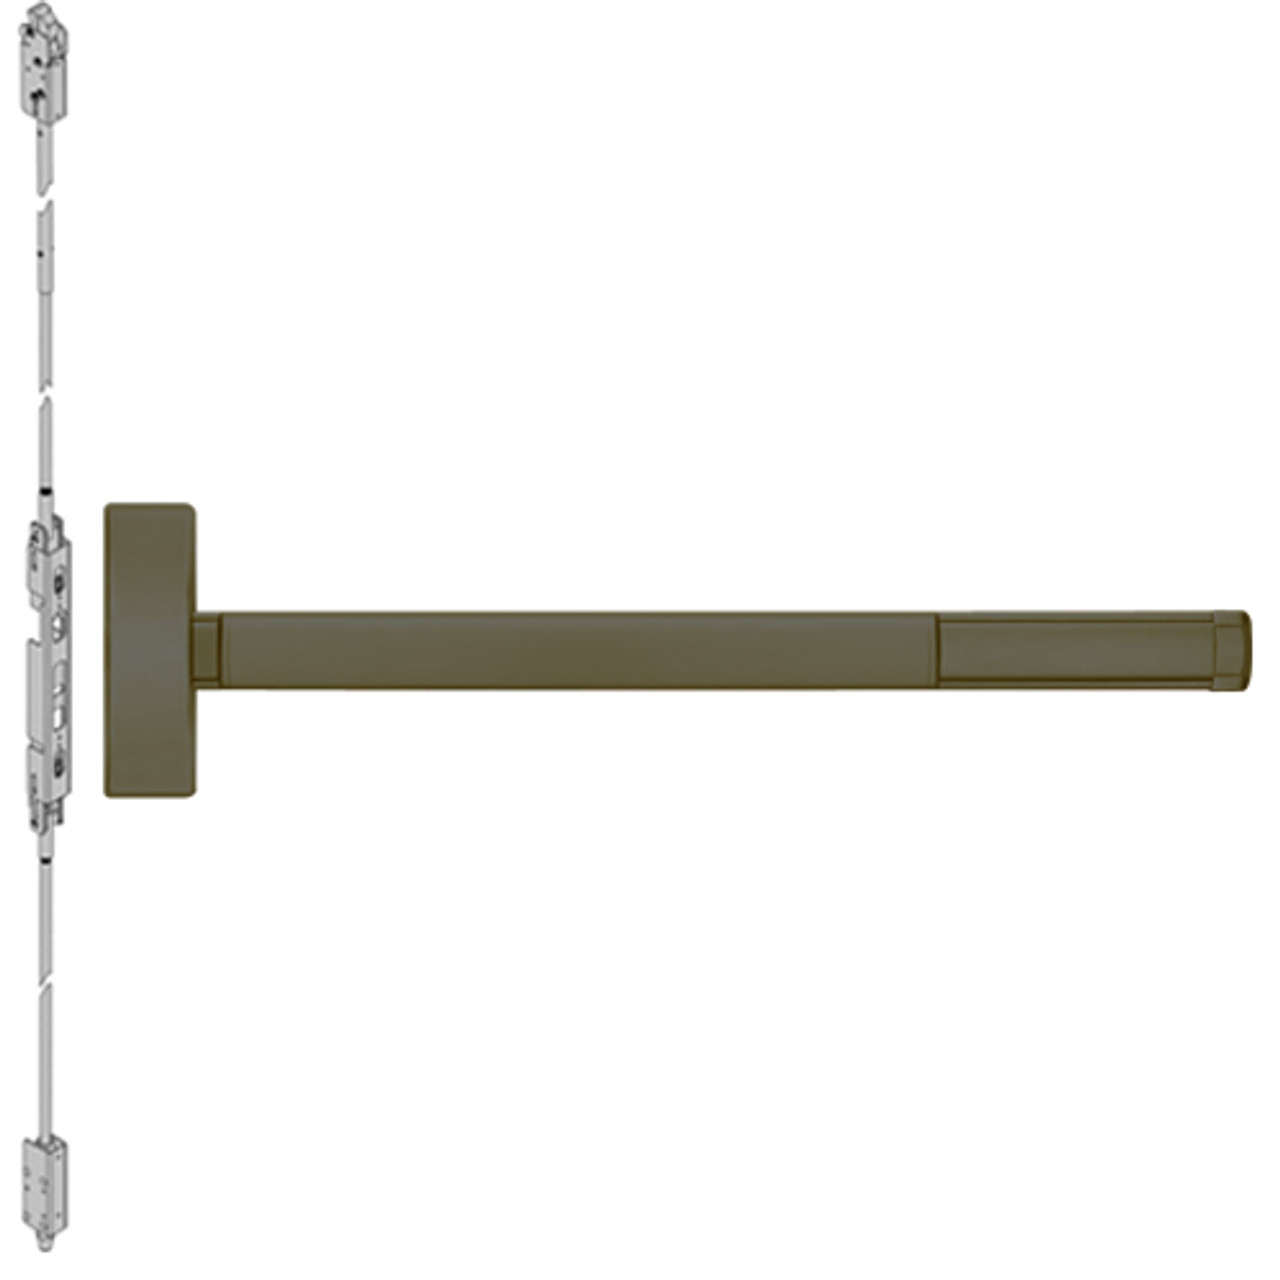 ELRFL2814LBR-613-48 PHI 2800 Series Fire Rated Concealed Vertical Rod Exit Device with Electric Latch Retraction Prepped for Lever-Knob Always Active in Oil Rubbed Bronze Finish